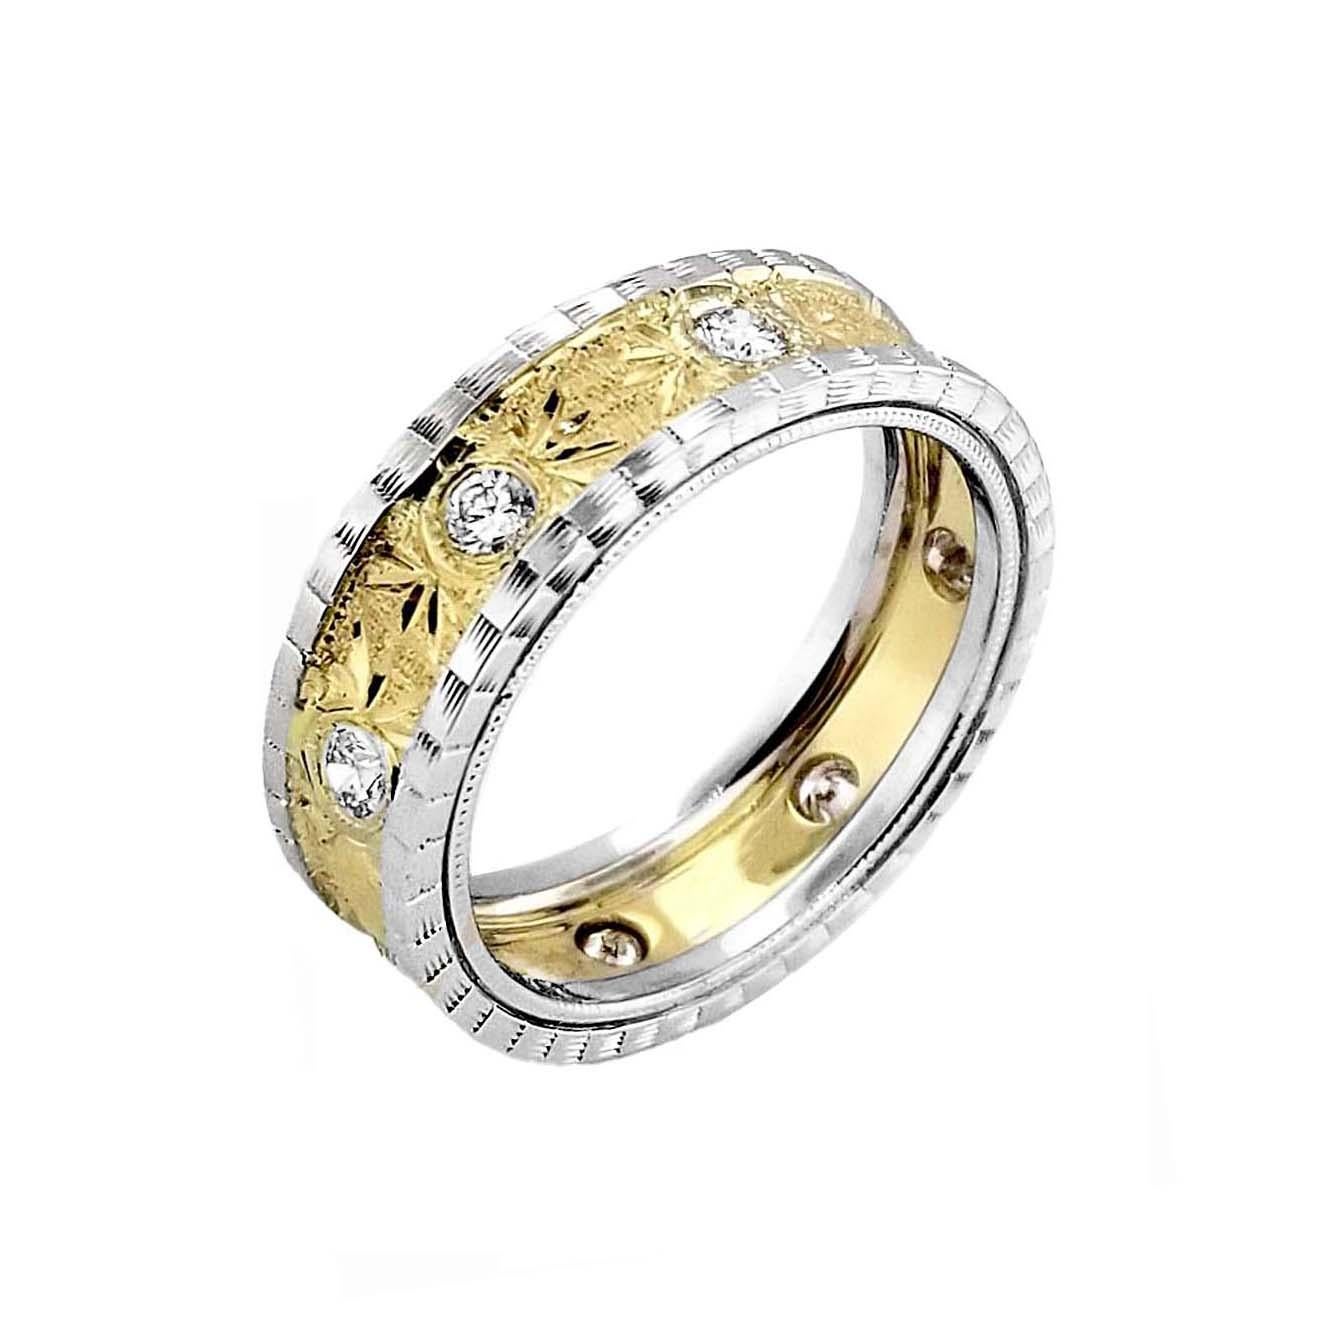 Produced by award winning Italian designer Stefano Vitolo. Stefano creates custom artisanal one of a kind jewelry with excellent gemstones in a truly old world Italian craftmanship.
This handcrafted ring has 0.40 total carat weight of F/G color and